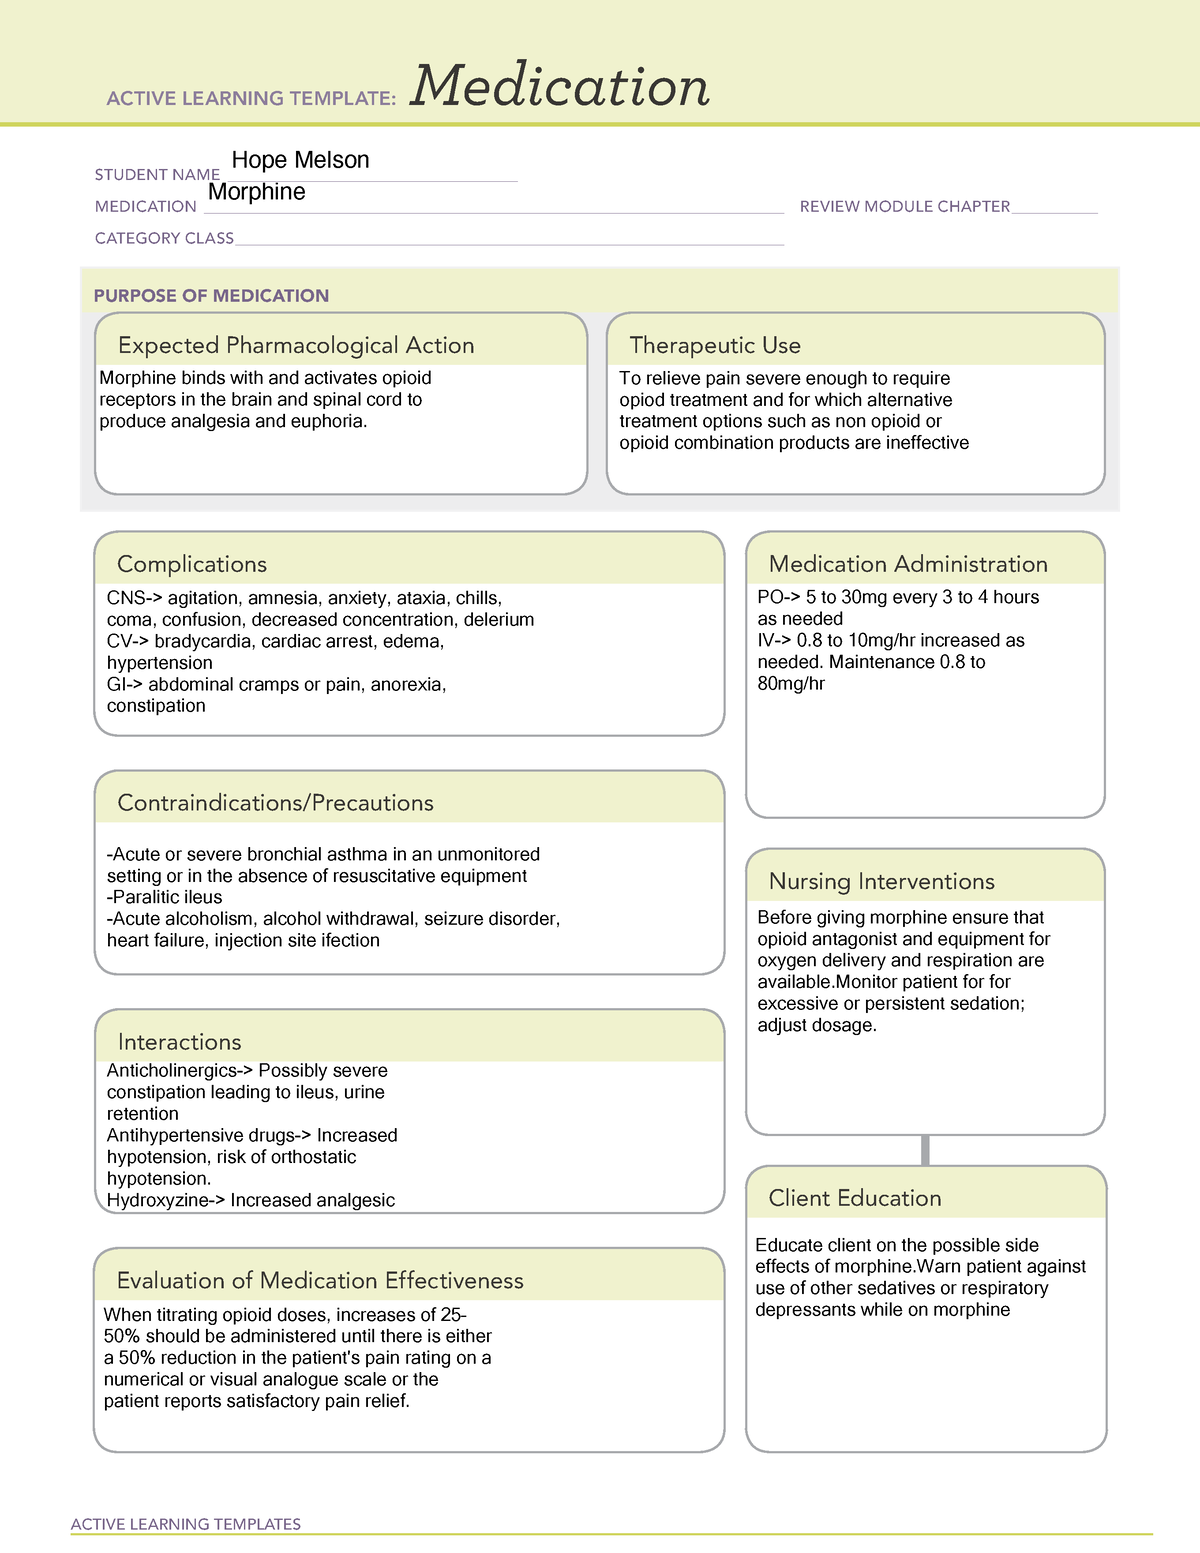 2022 ATI Medication Template Morphine ACTIVE LEARNING TEMPLATES